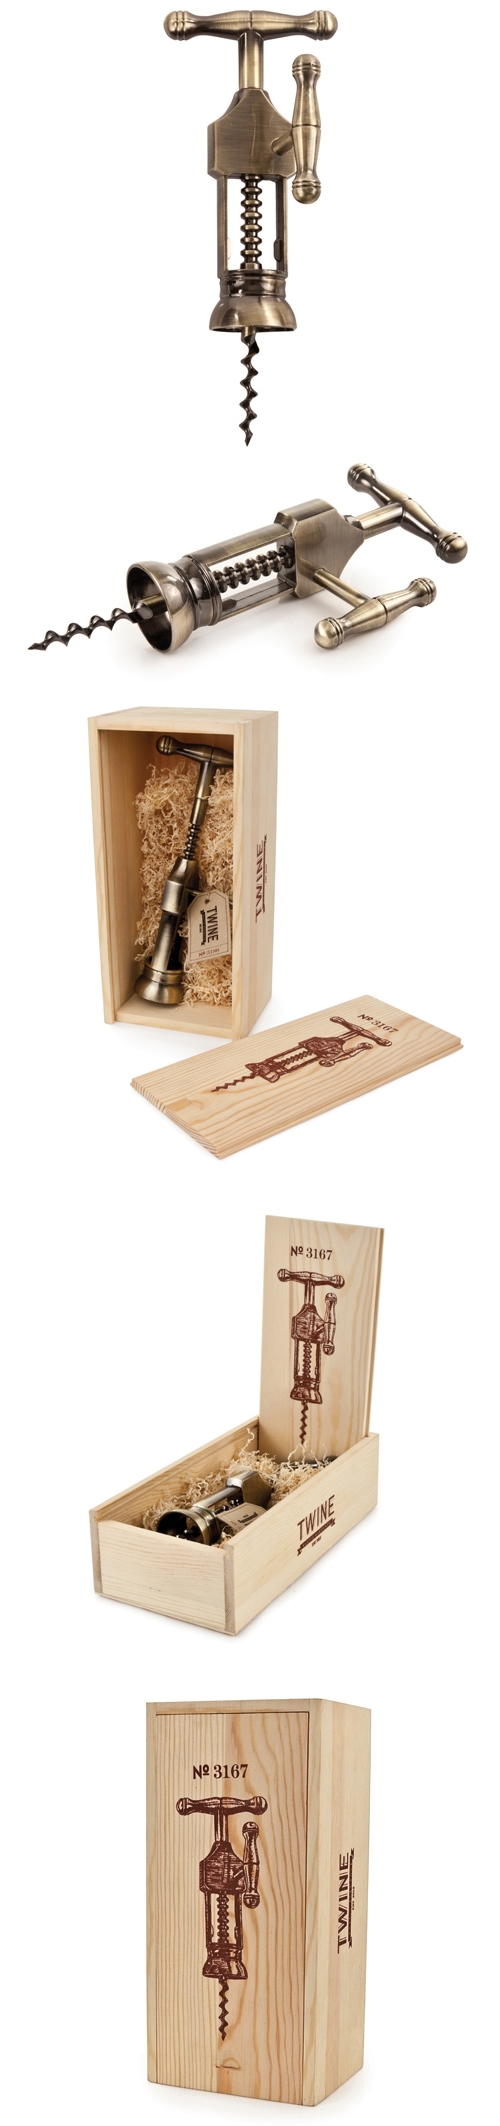 Chateau Antique Gold-Finish Corkscrew in Wood Box by Twine